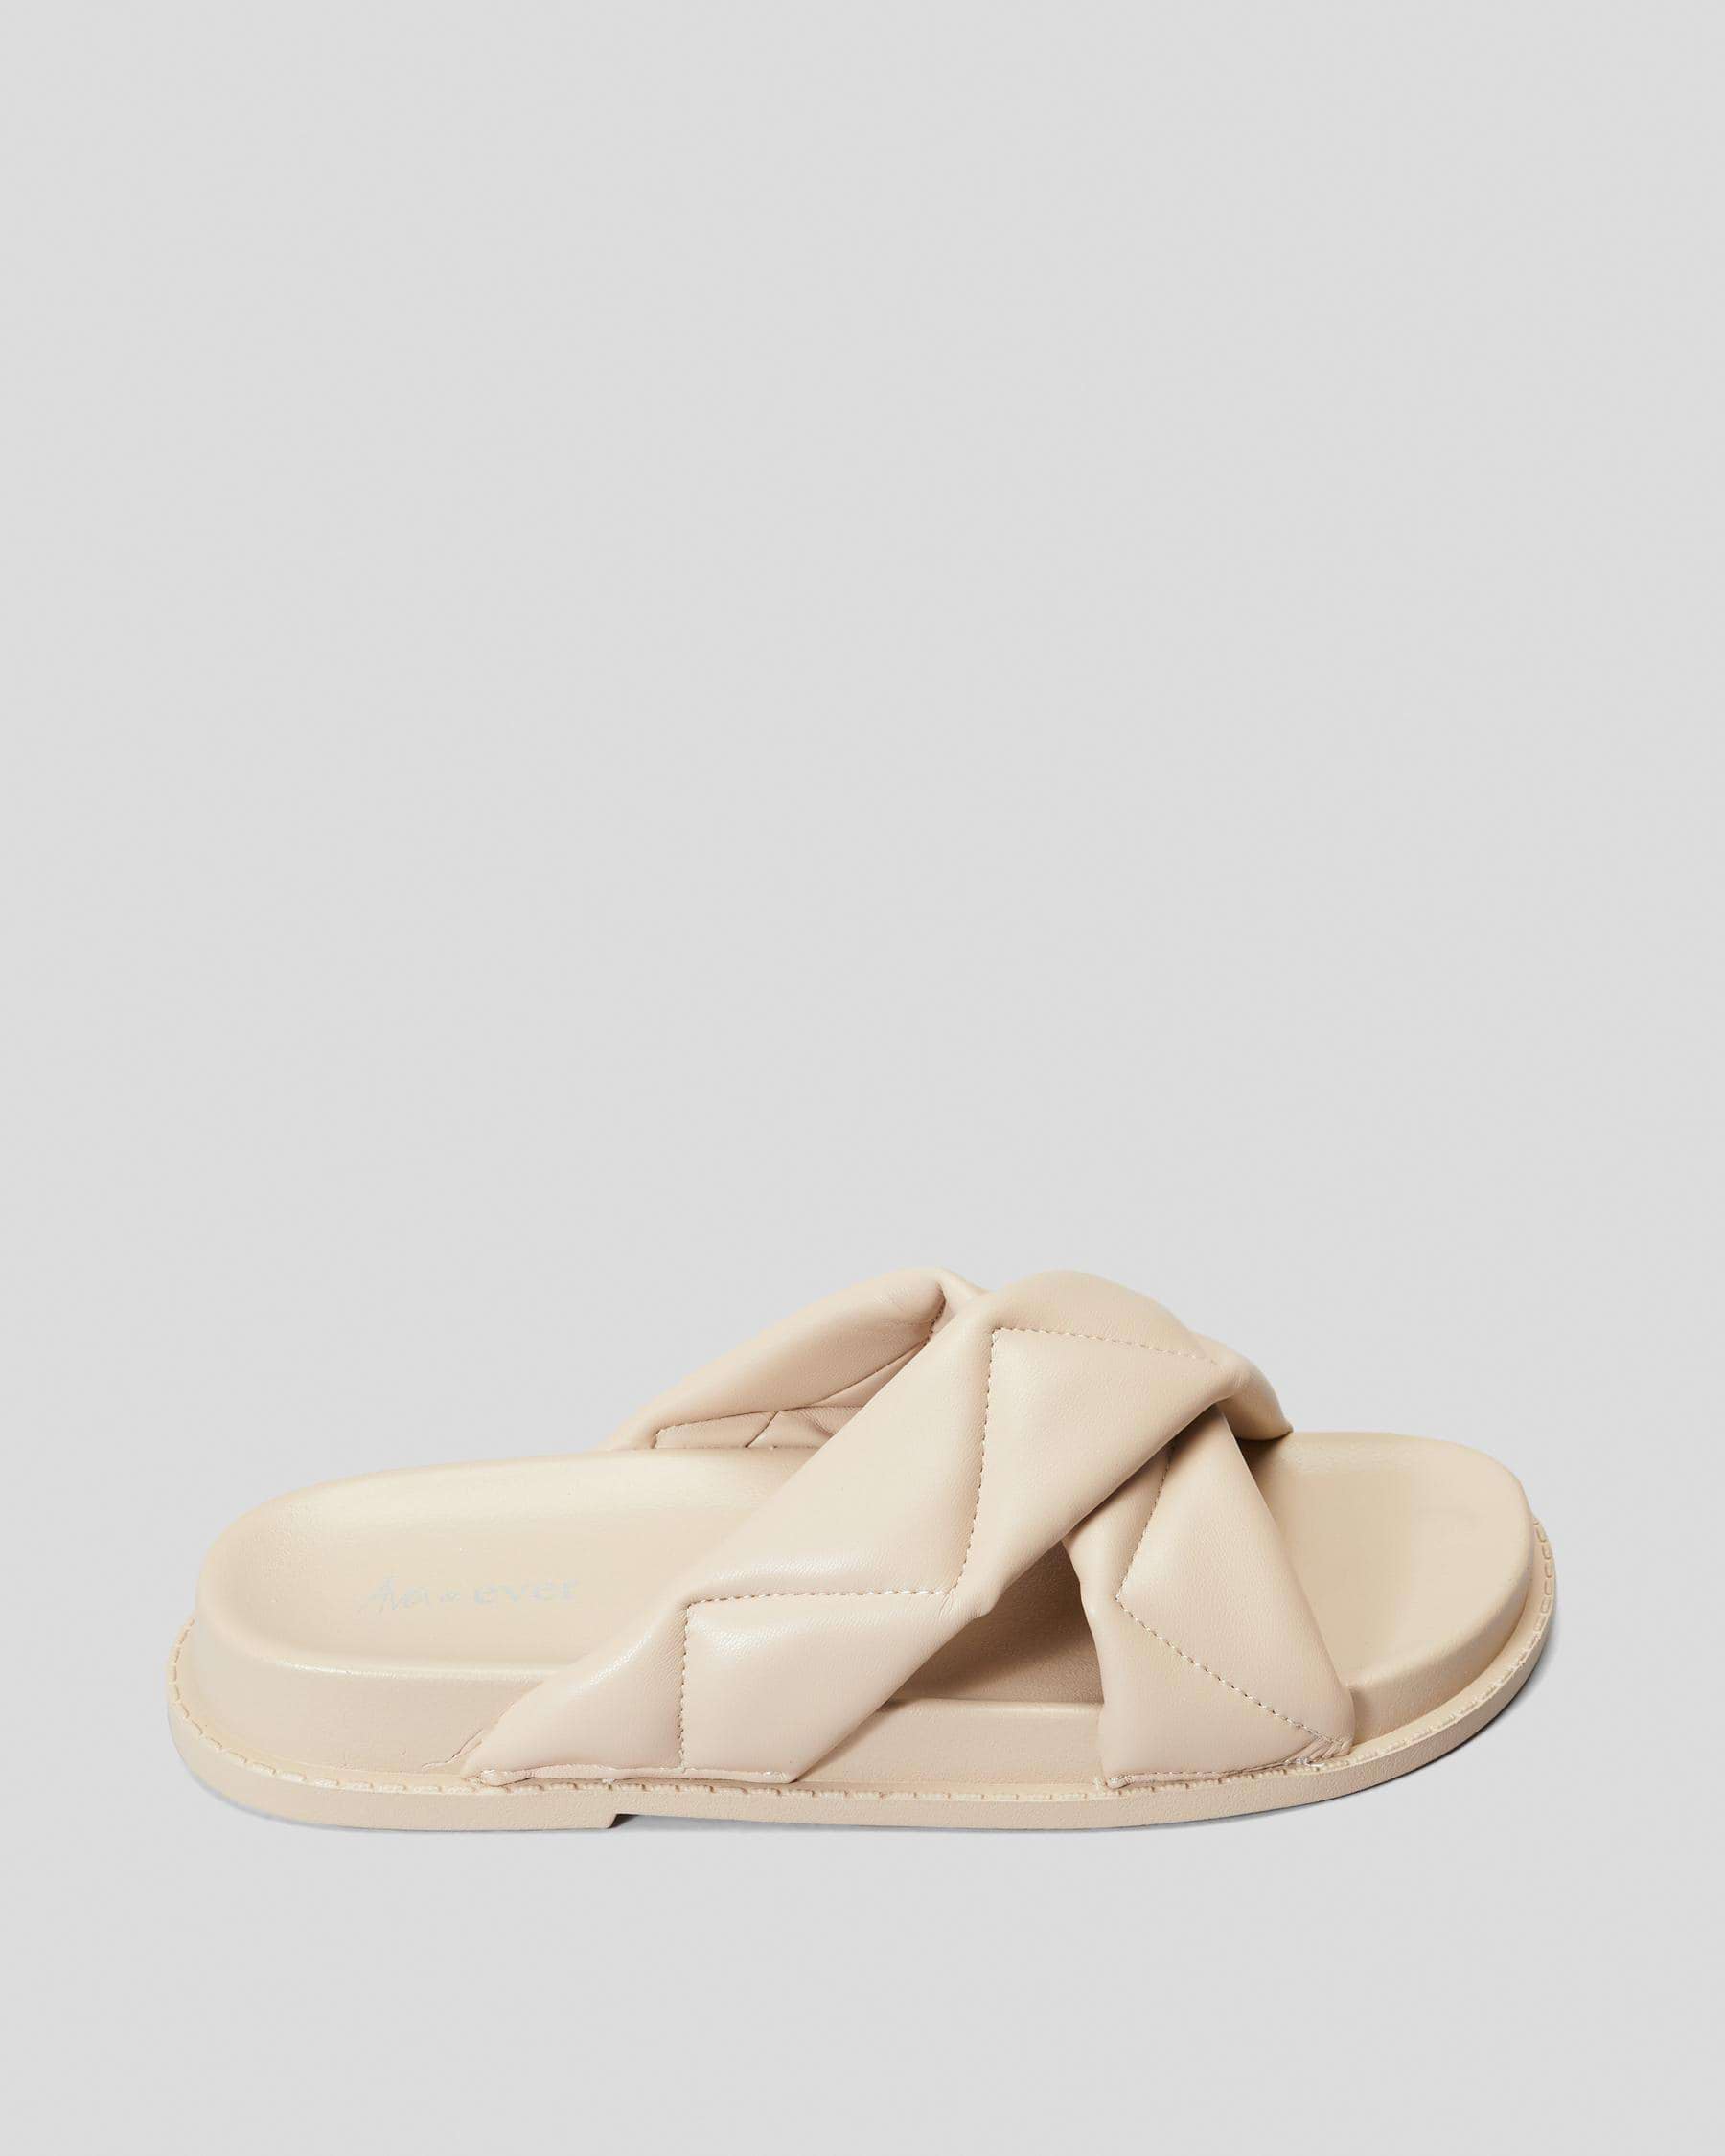 Ava And Ever Larissa Slide Sandals In Cashew - Fast Shipping & Easy ...